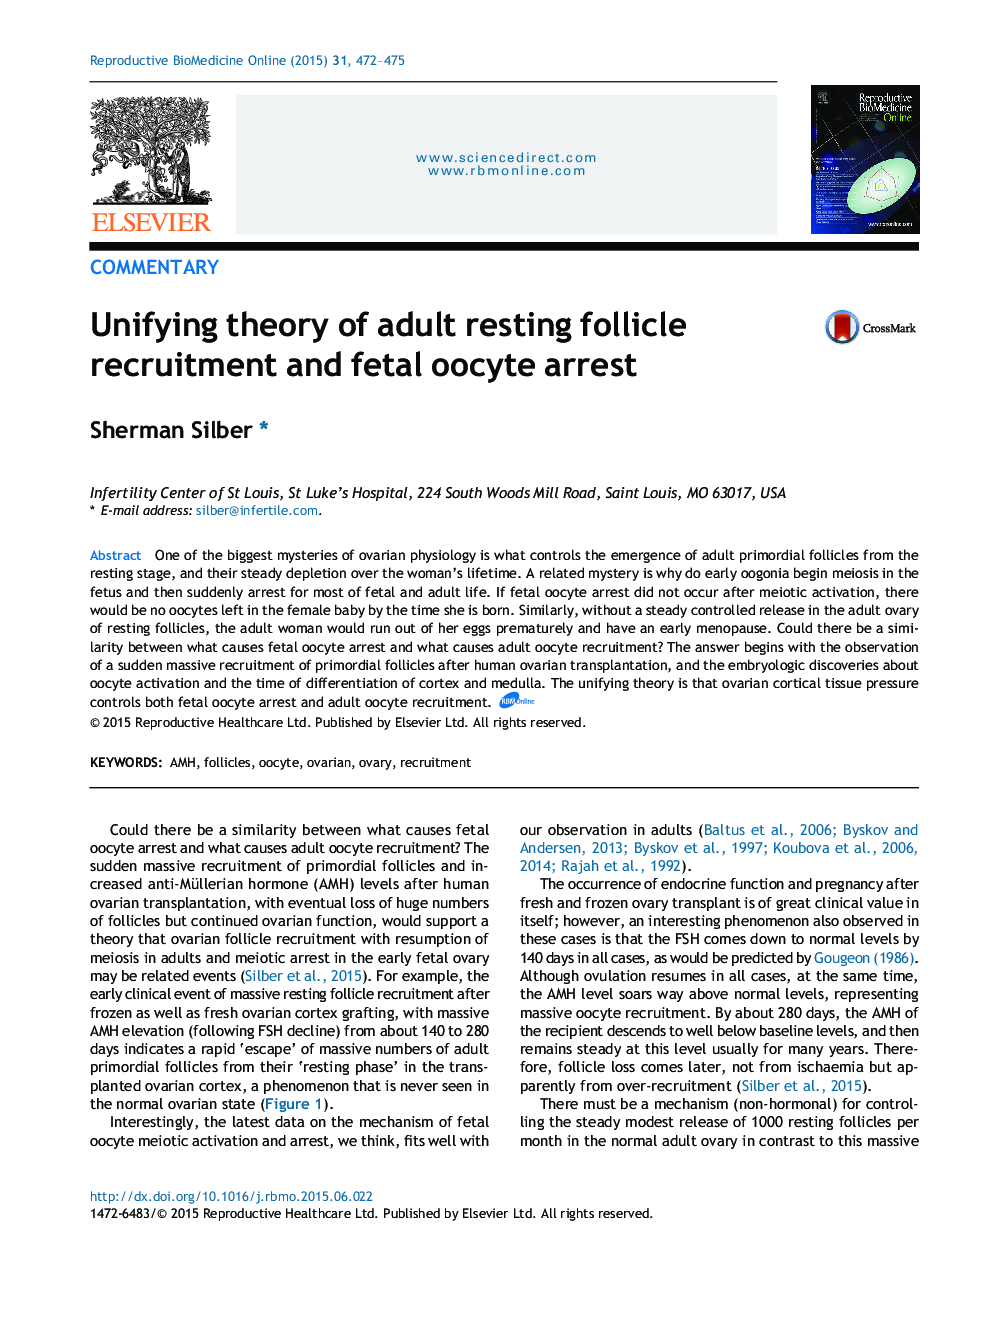 Unifying theory of adult resting follicle recruitment and fetal oocyte arrest